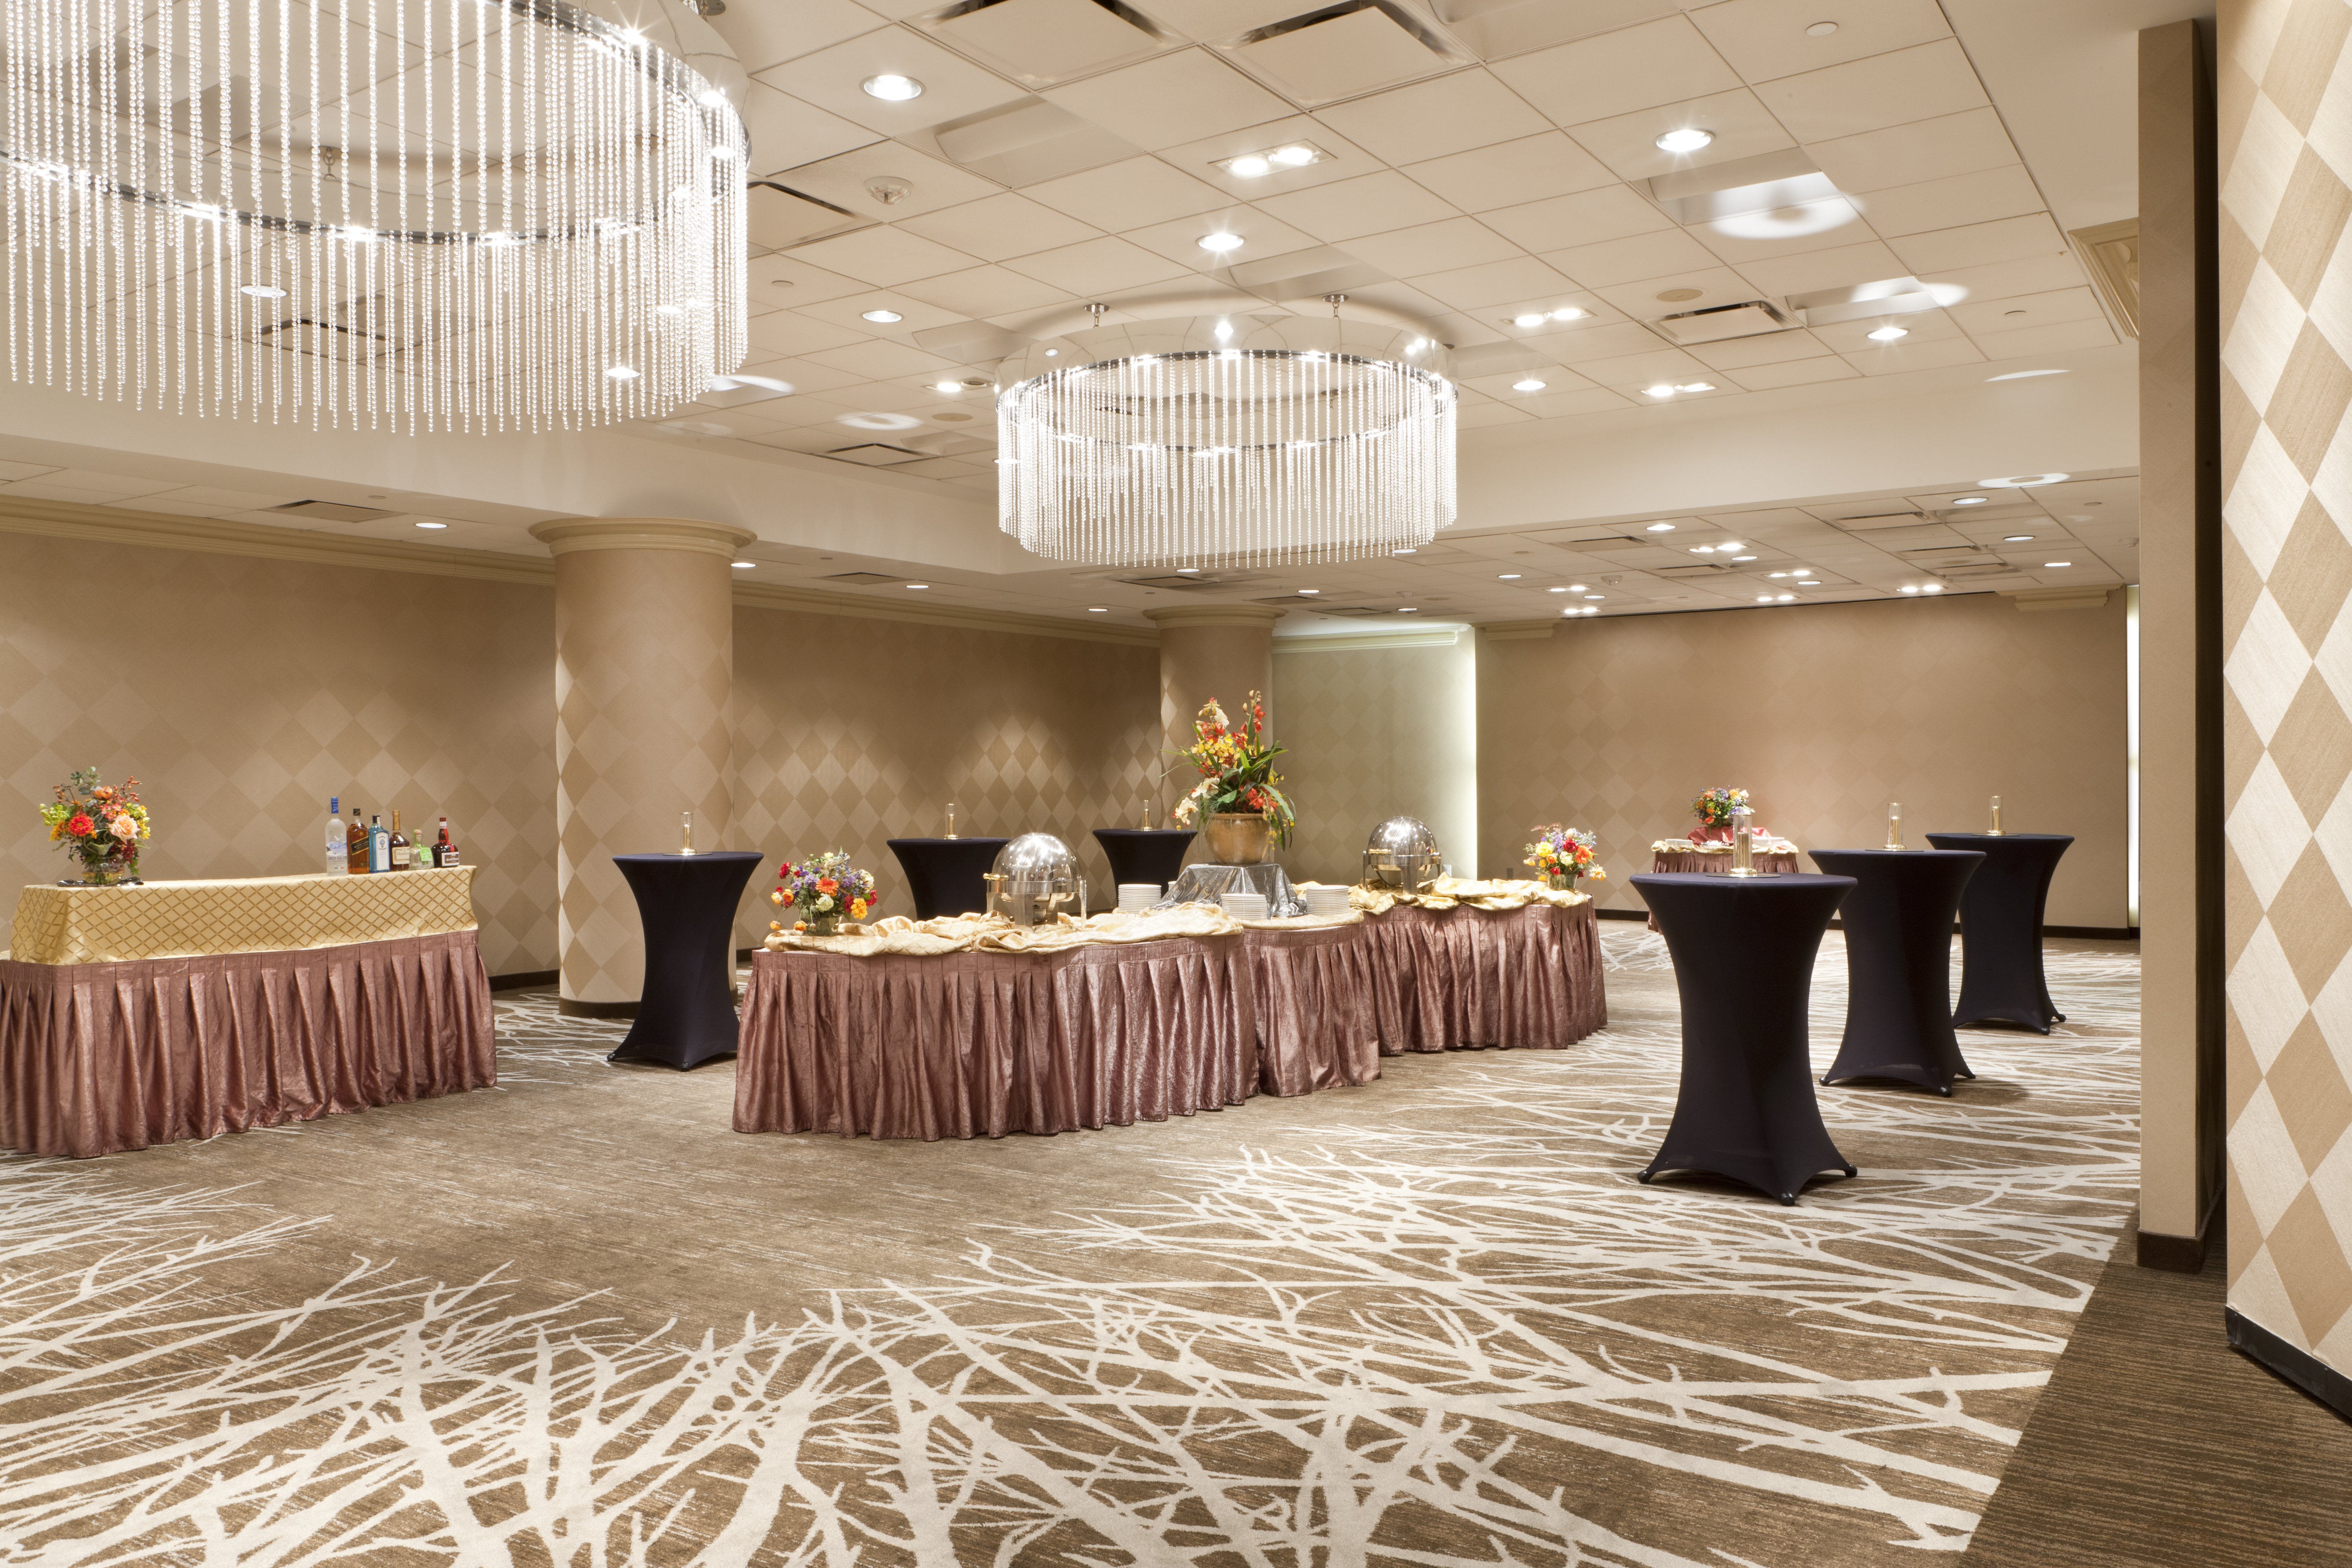 Can deliver a variety of events, flexible use of space possible.